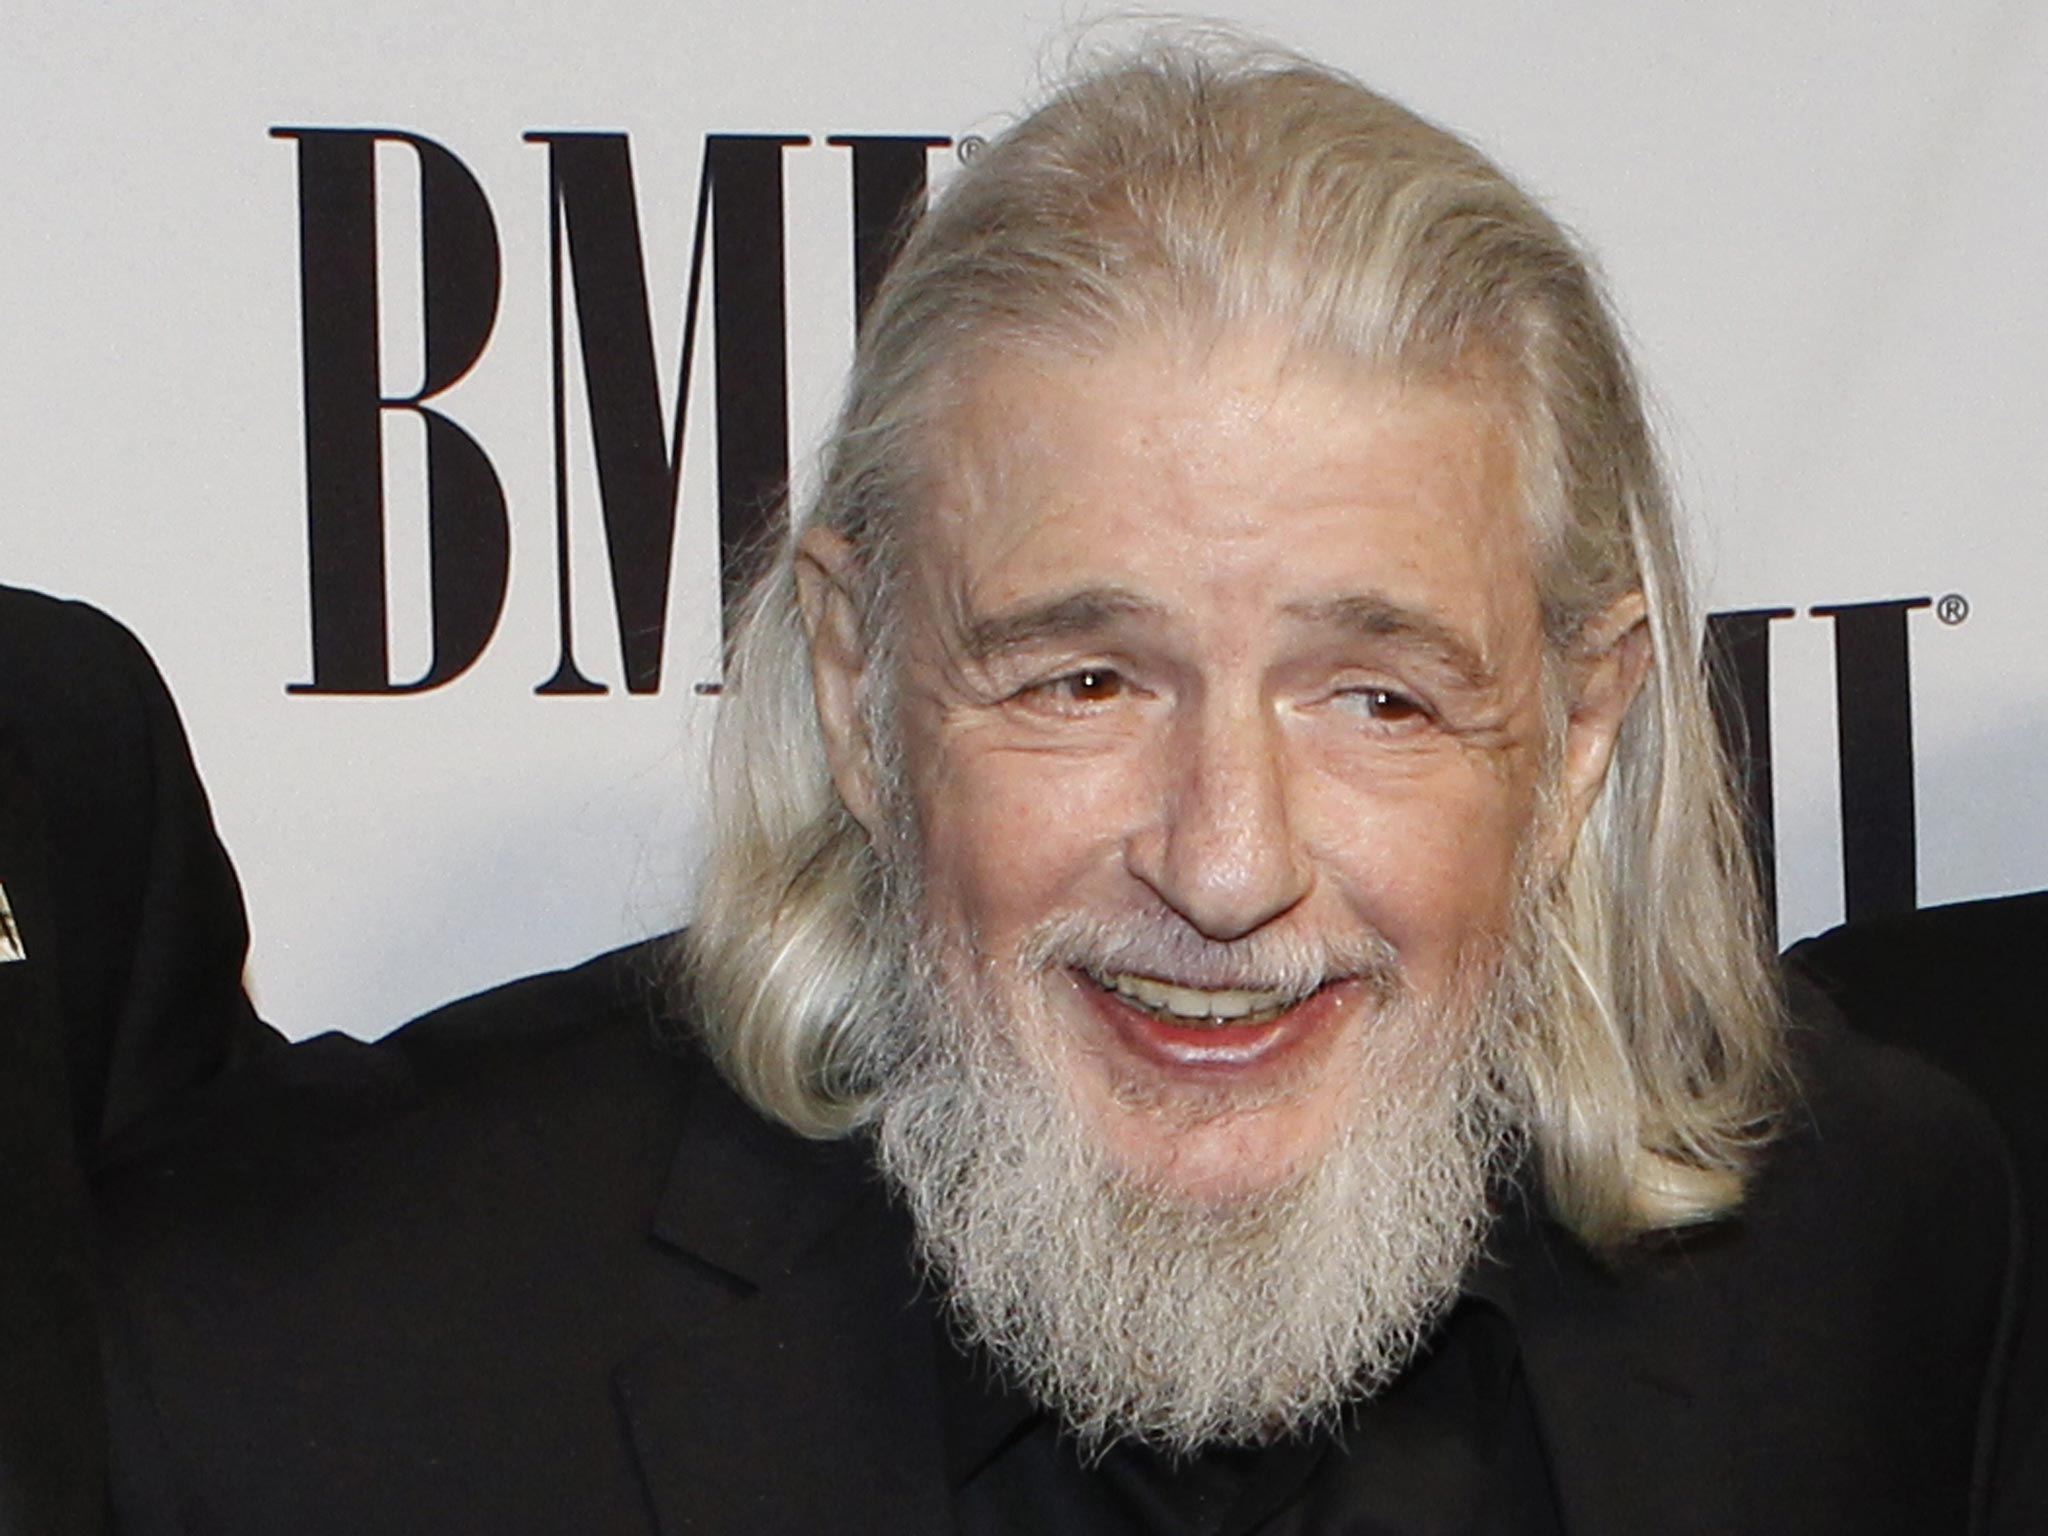 Gerry Goffin at the Pop Music Awards in Beverly Hills in 2012